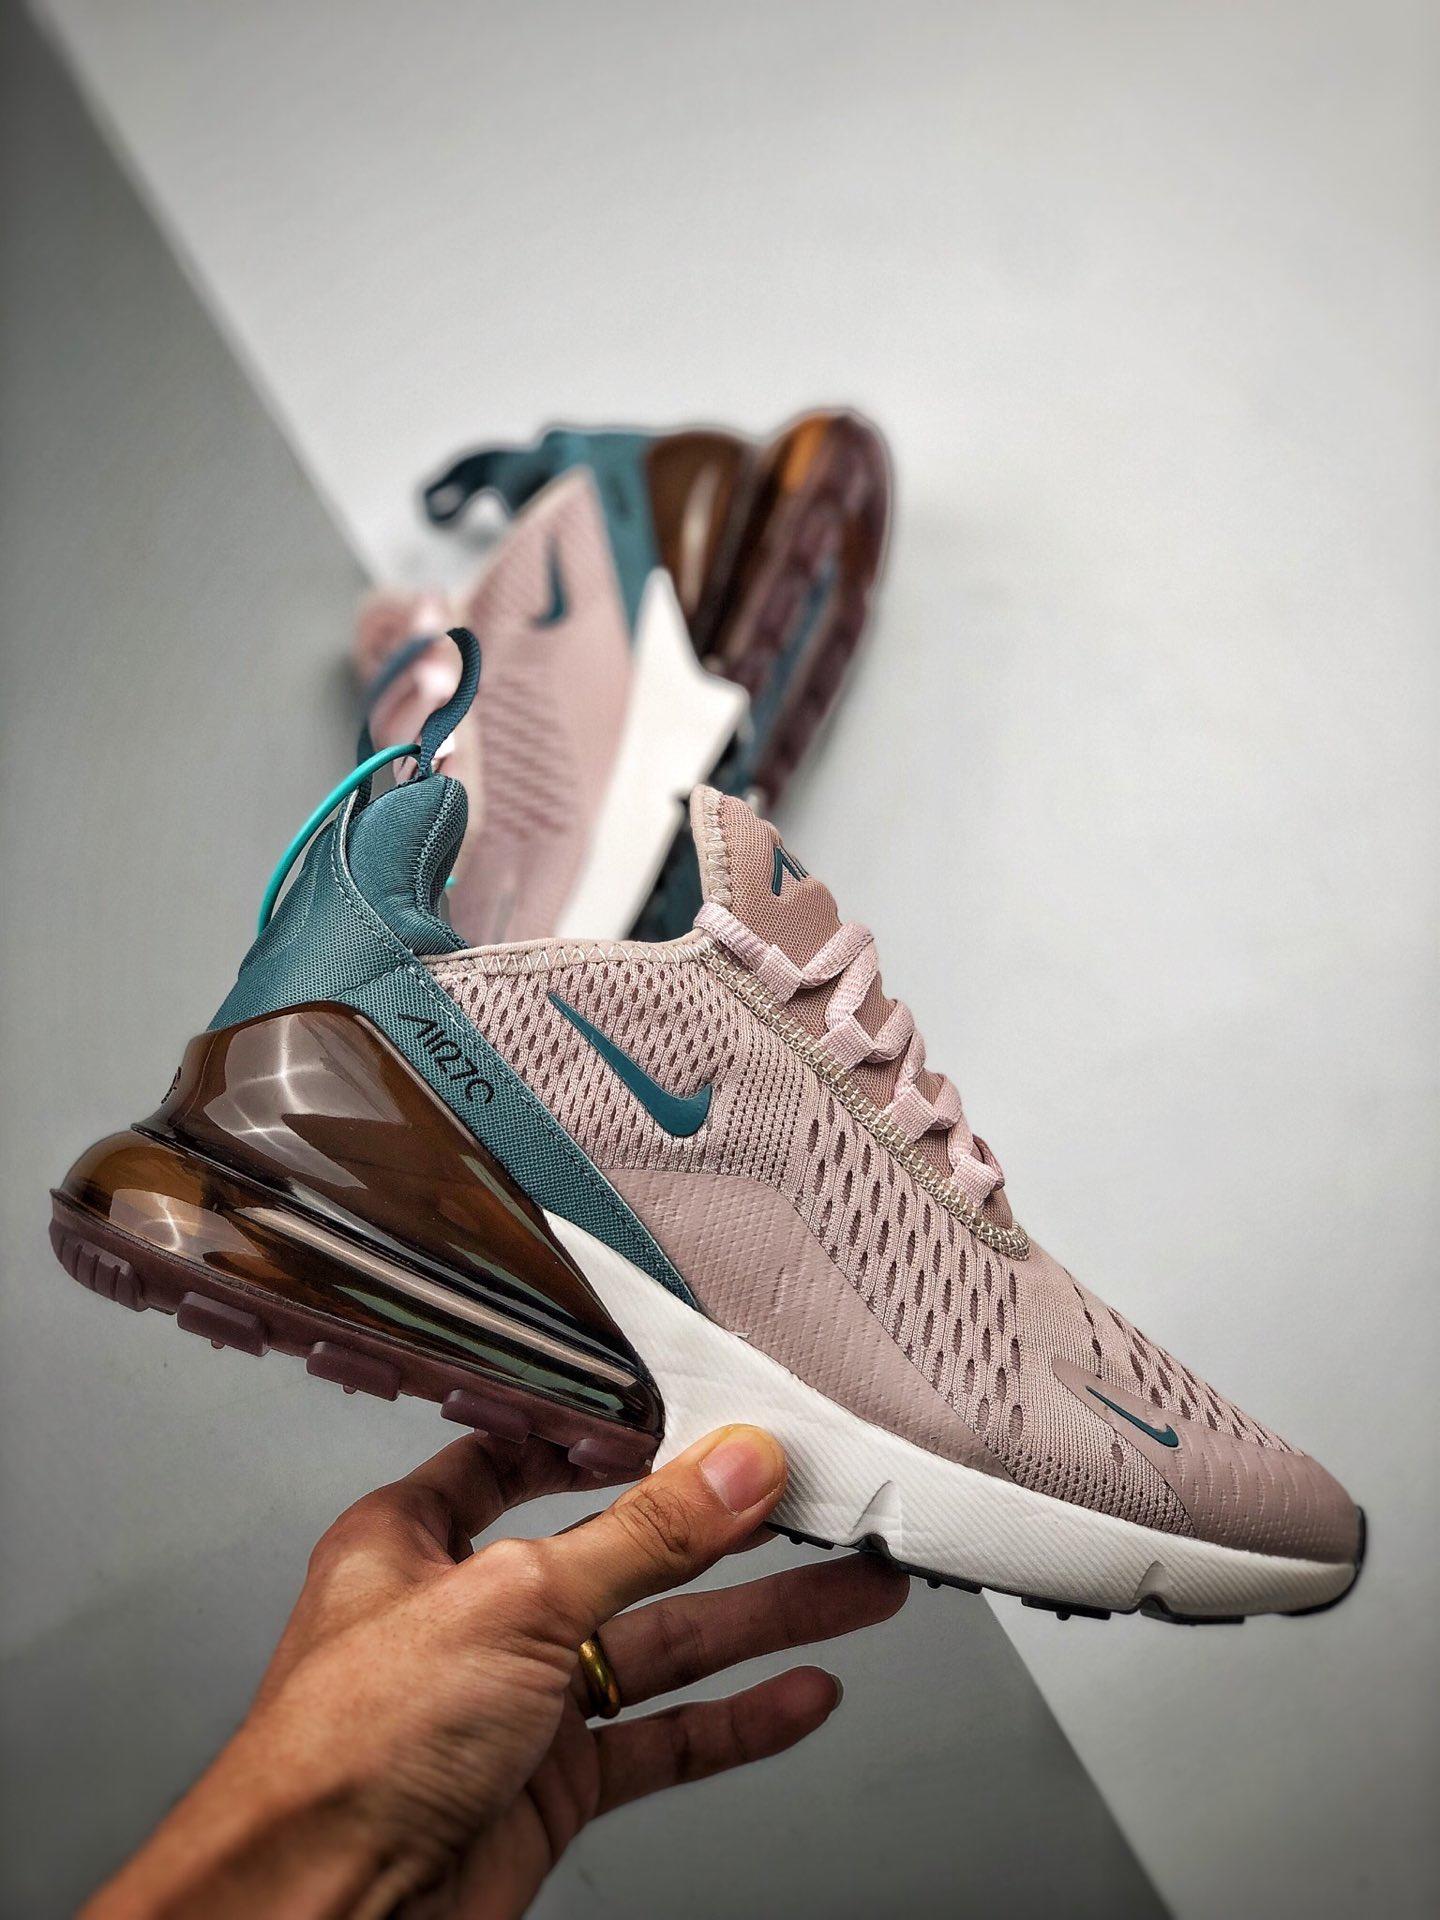 Nike Wmns Air Max 270 Pink Teal AH6789-602 For Sale – Sneaker Hello